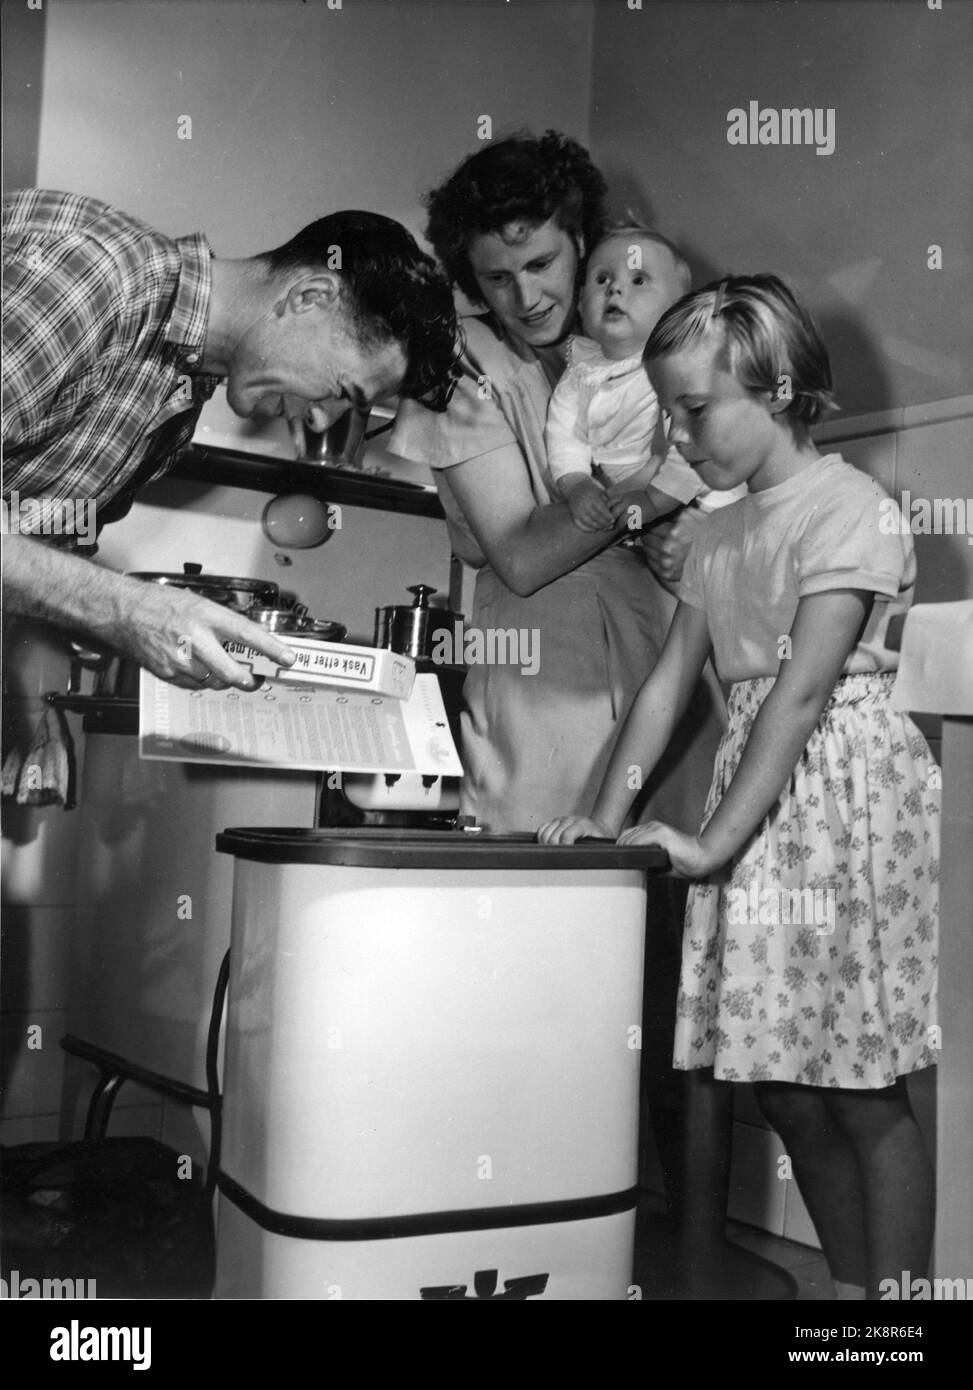 Oslo; 1951. The housewife's dream - an evaluated washing machine! The Gulbrandsen family in Drammen receives its first washing machine to revolutionize the housework. Photo: Sverre A. Børretzen / Current / NTB Stock Photo